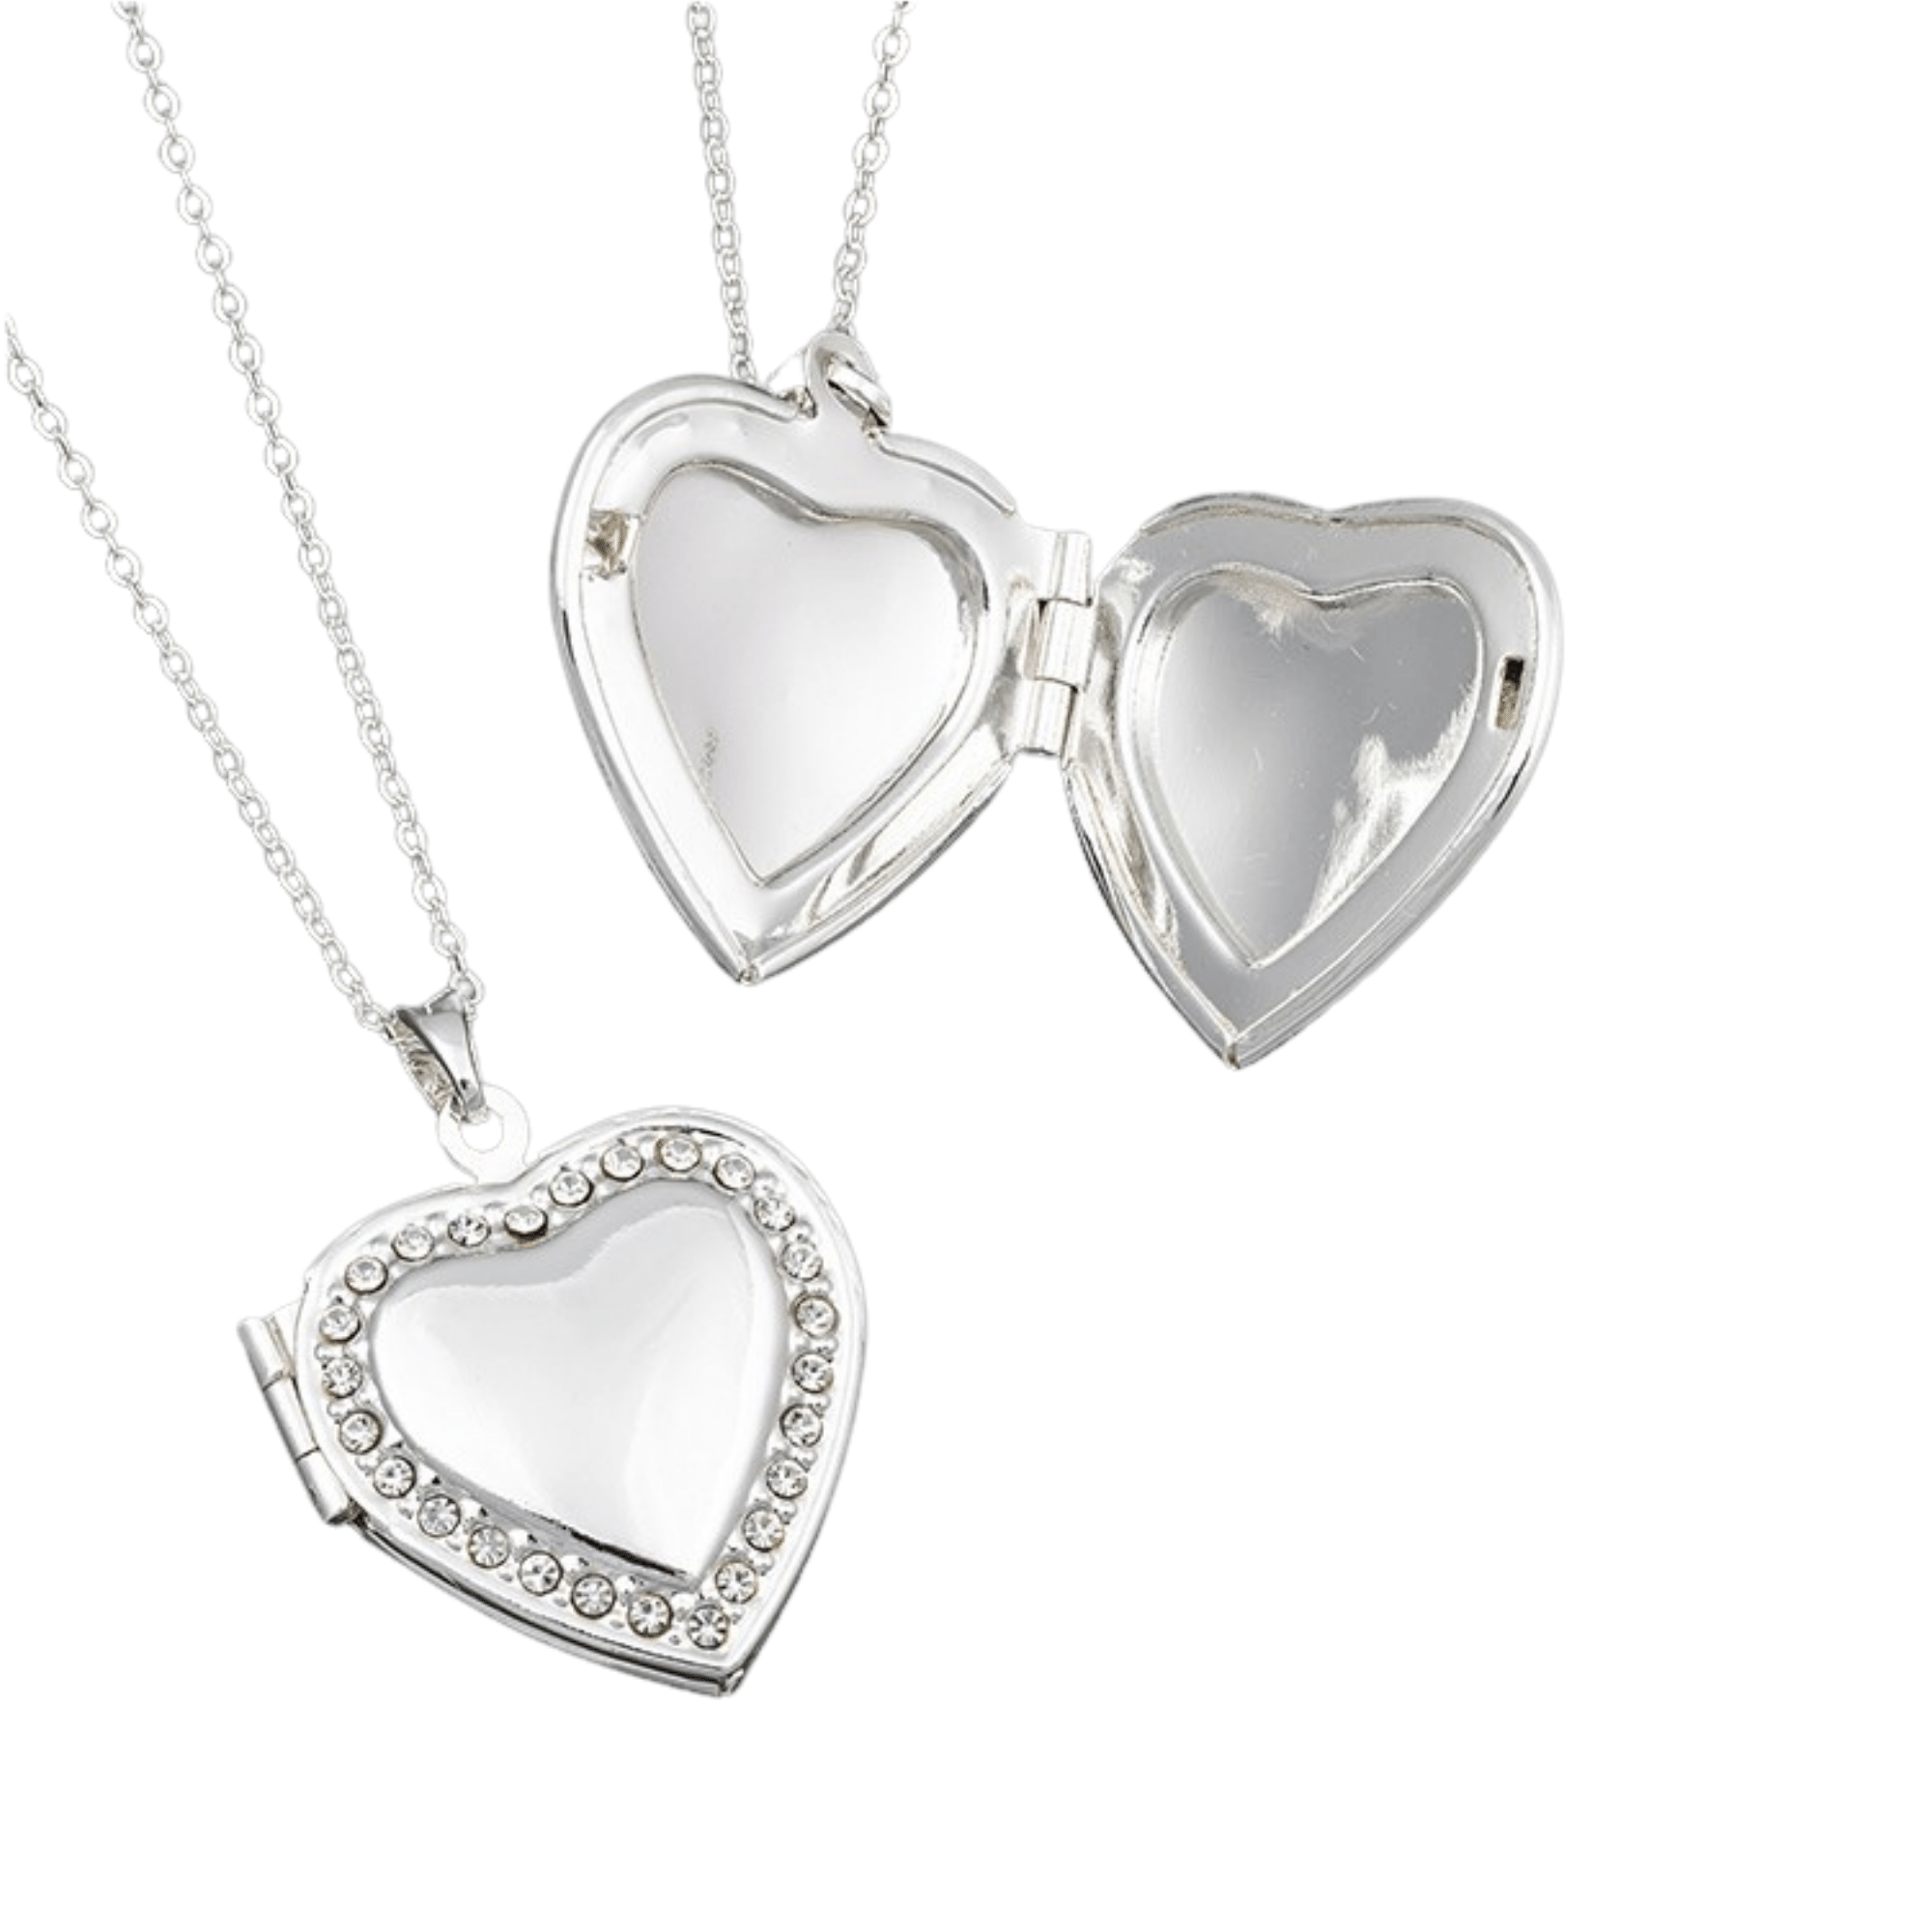 A Touch Of Sparkle Heart Locket, Personalised Gift